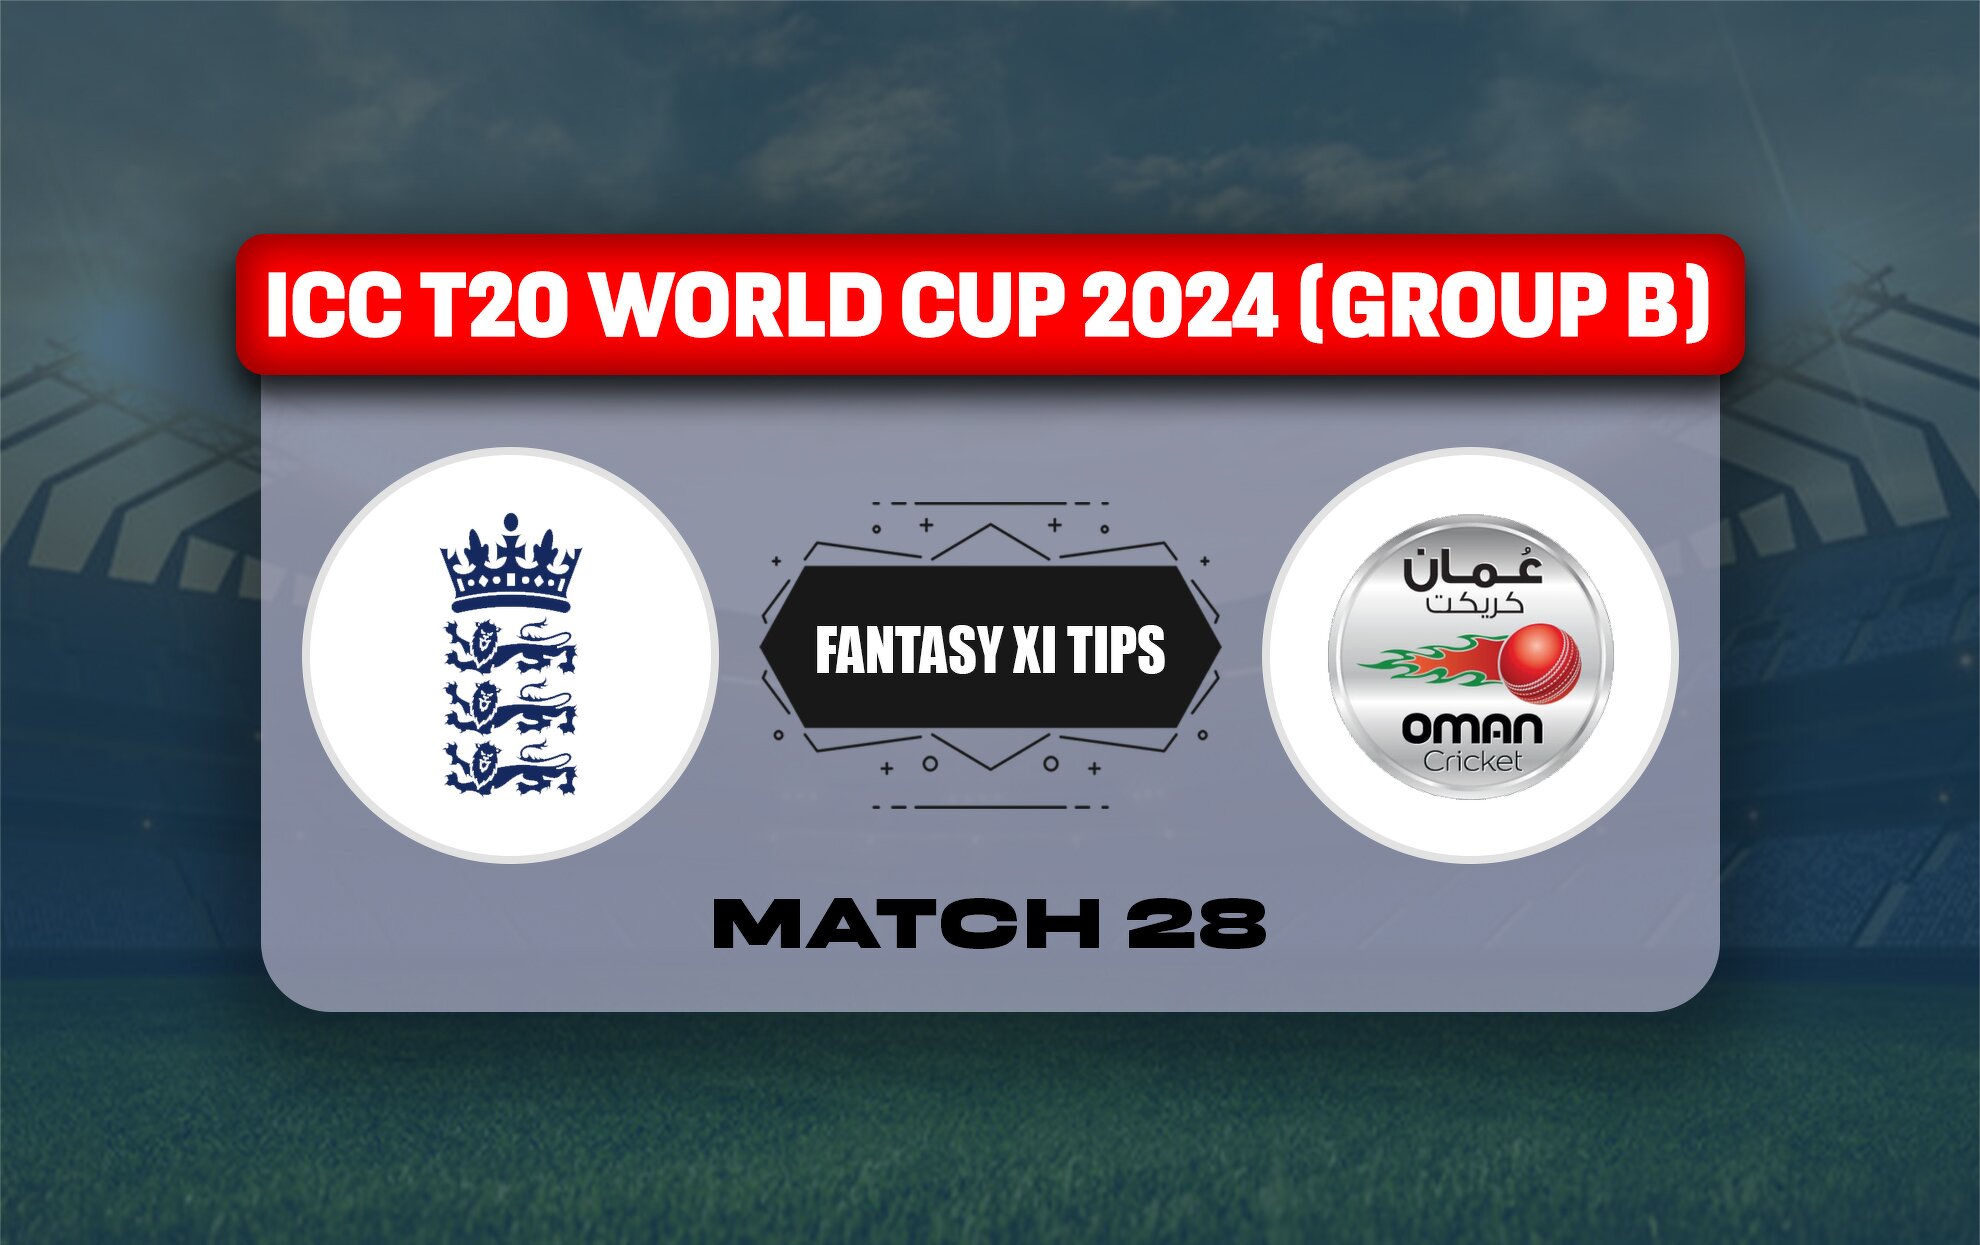 ENG vs OMA Dream11 Prediction, Dream11 Playing XI, Today Match 28, ICC T20 World Cup 2024